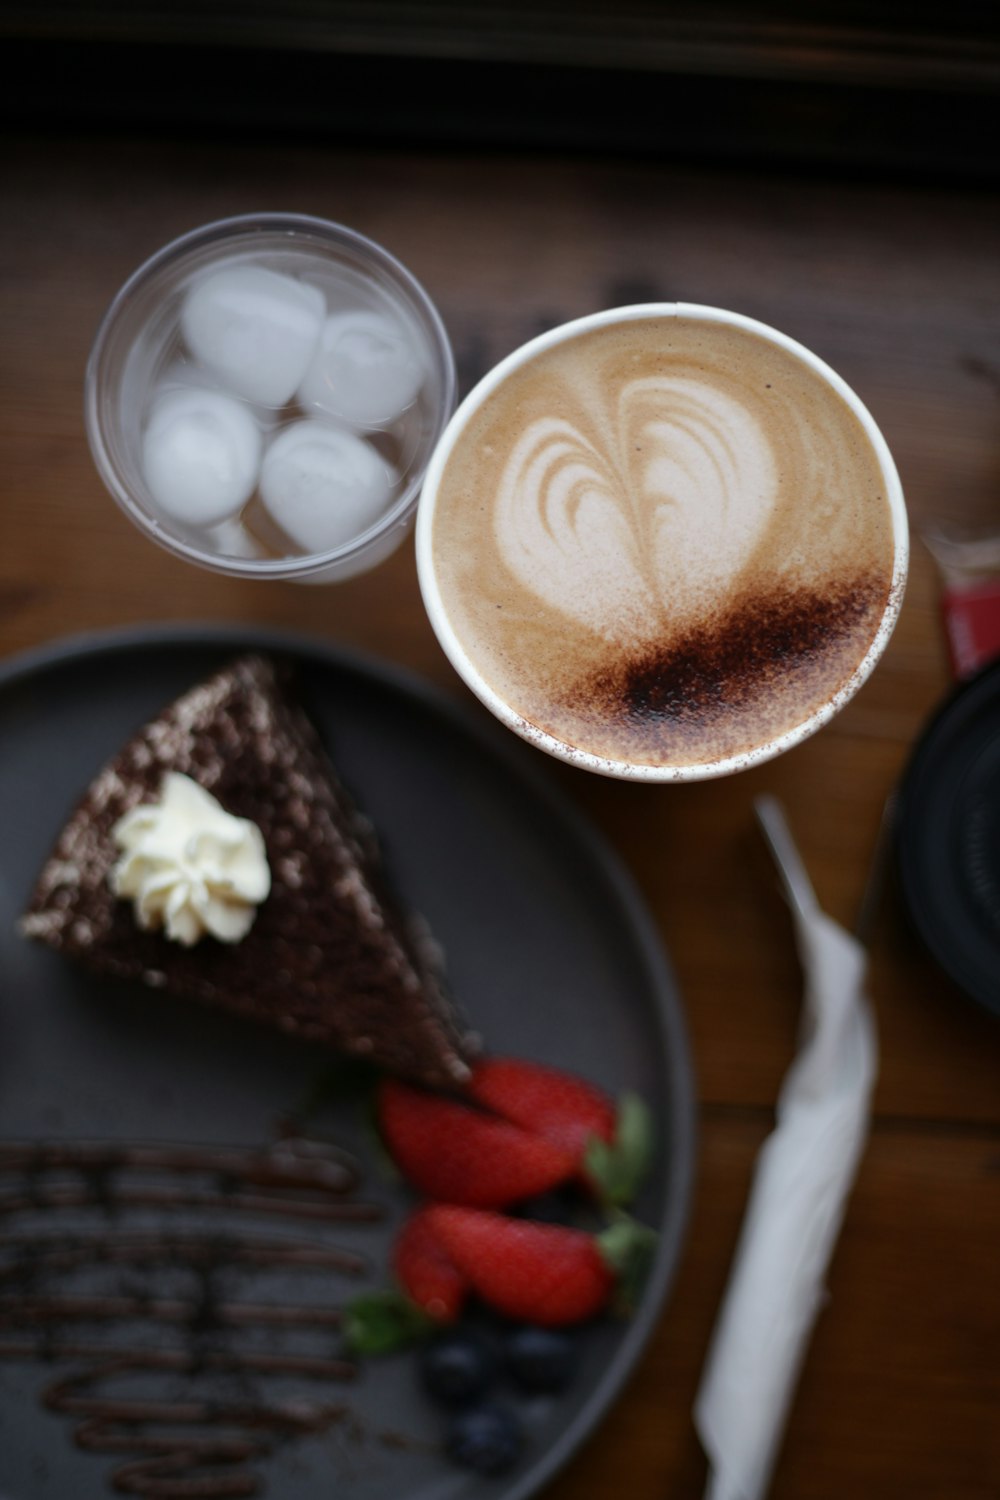 a plate with a piece of cake and a cup of coffee